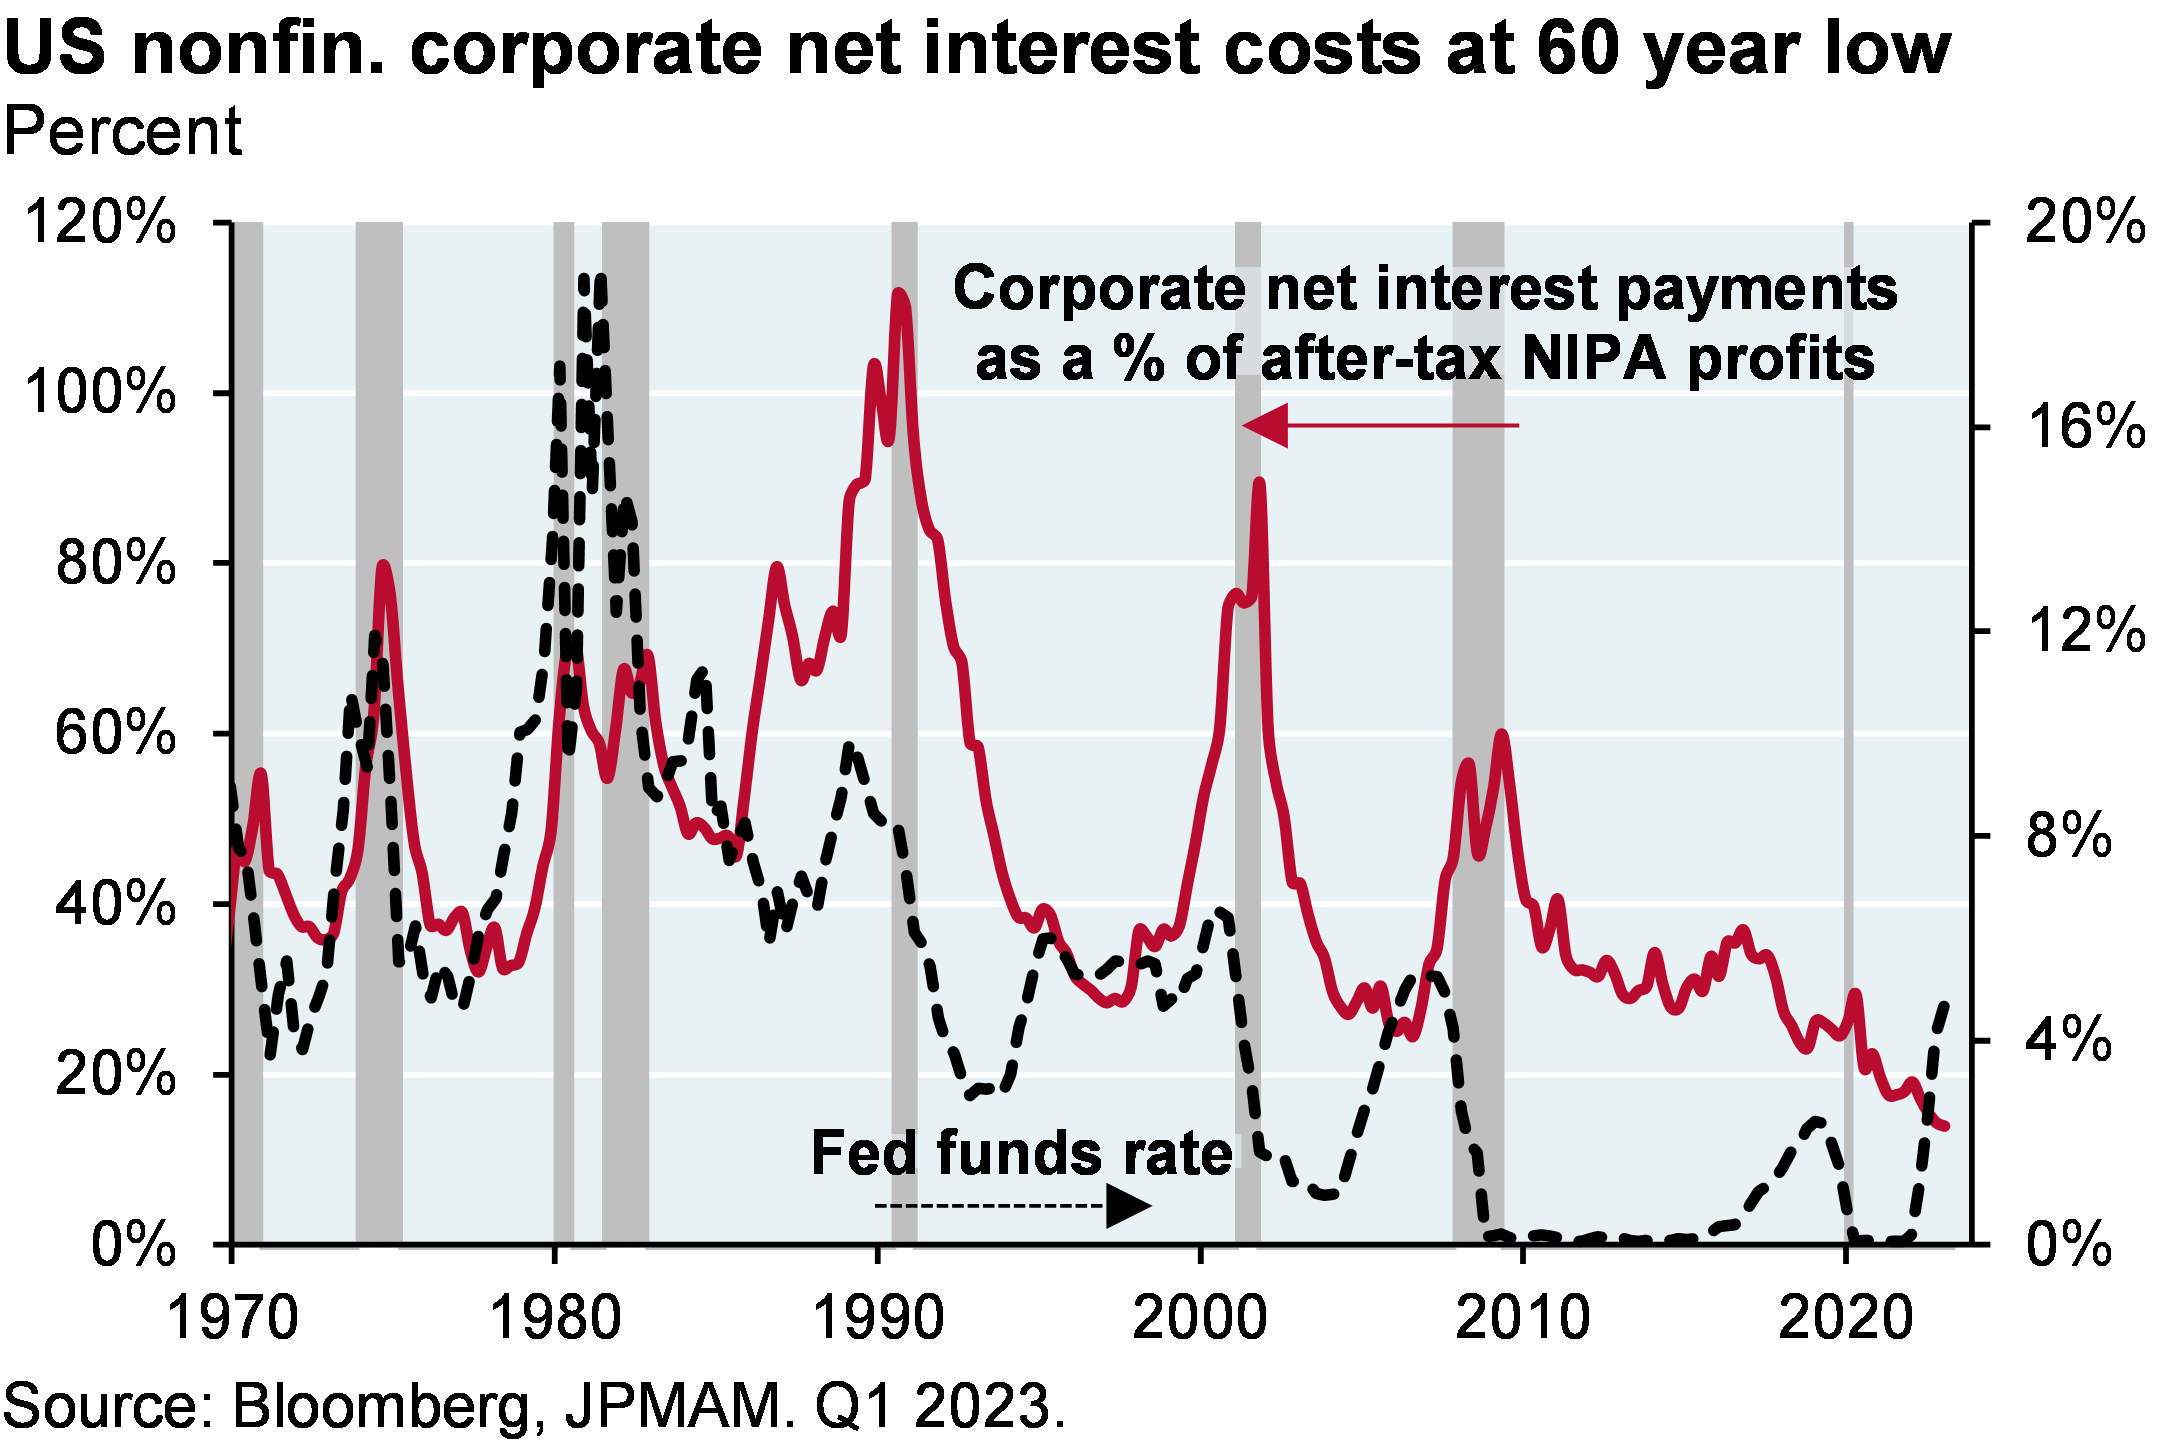 Line chart compares the Fed Funds rate and corporate net interest payments as a percent of after-tax profits since 1970. The line chart shows that for the first time on record, corporate interest expense is declining as the Fed hikes rates. 